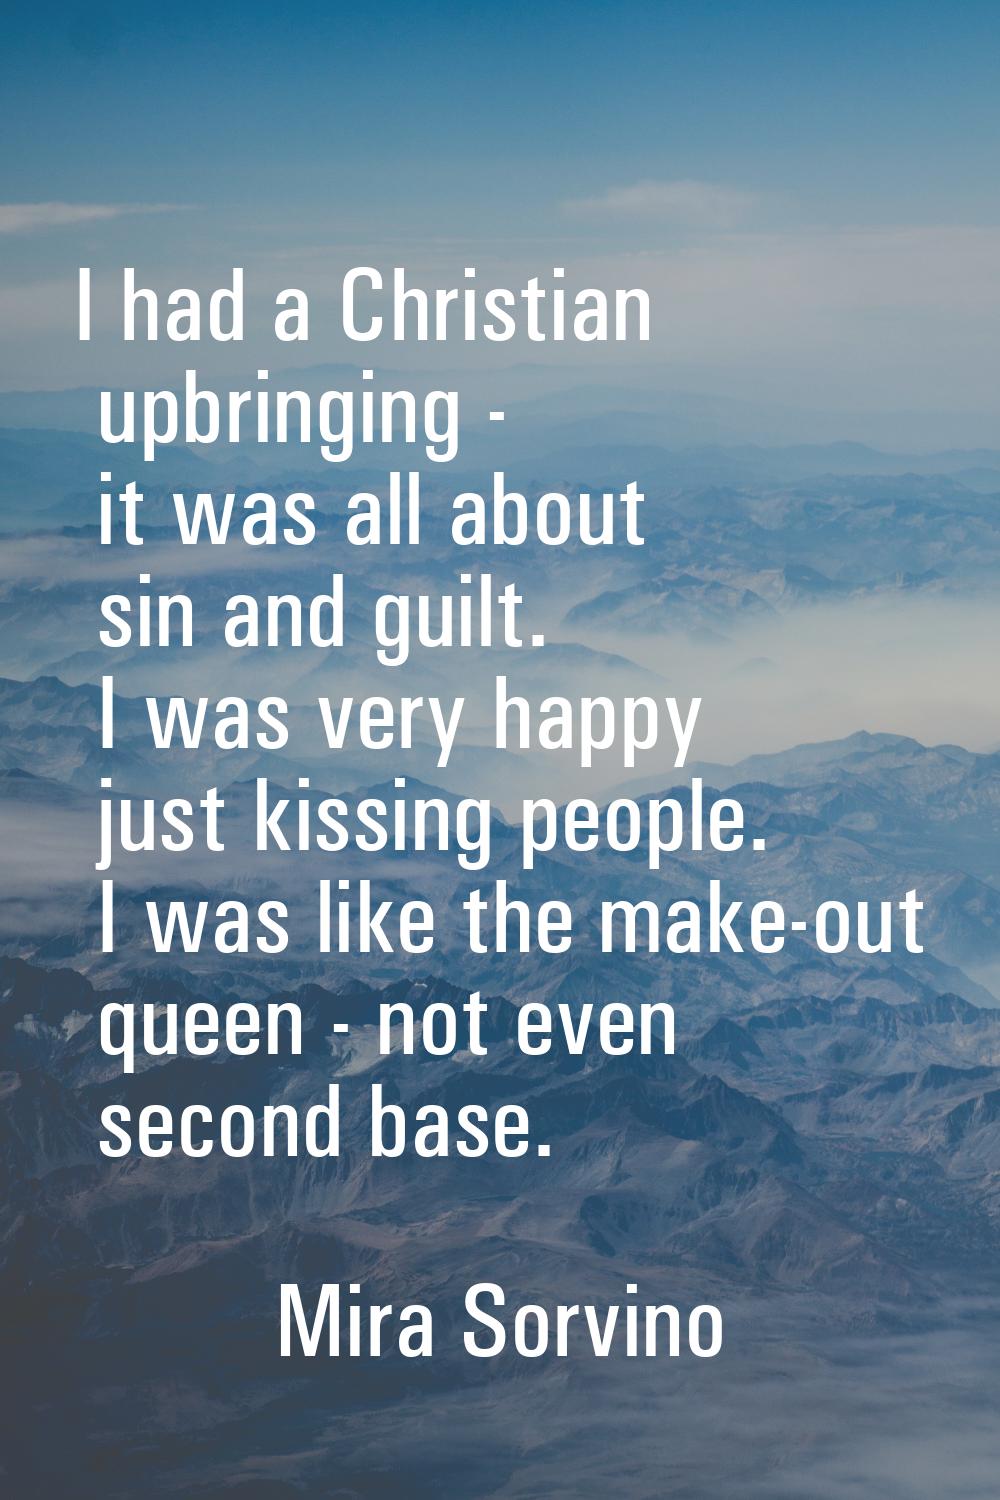 I had a Christian upbringing - it was all about sin and guilt. I was very happy just kissing people